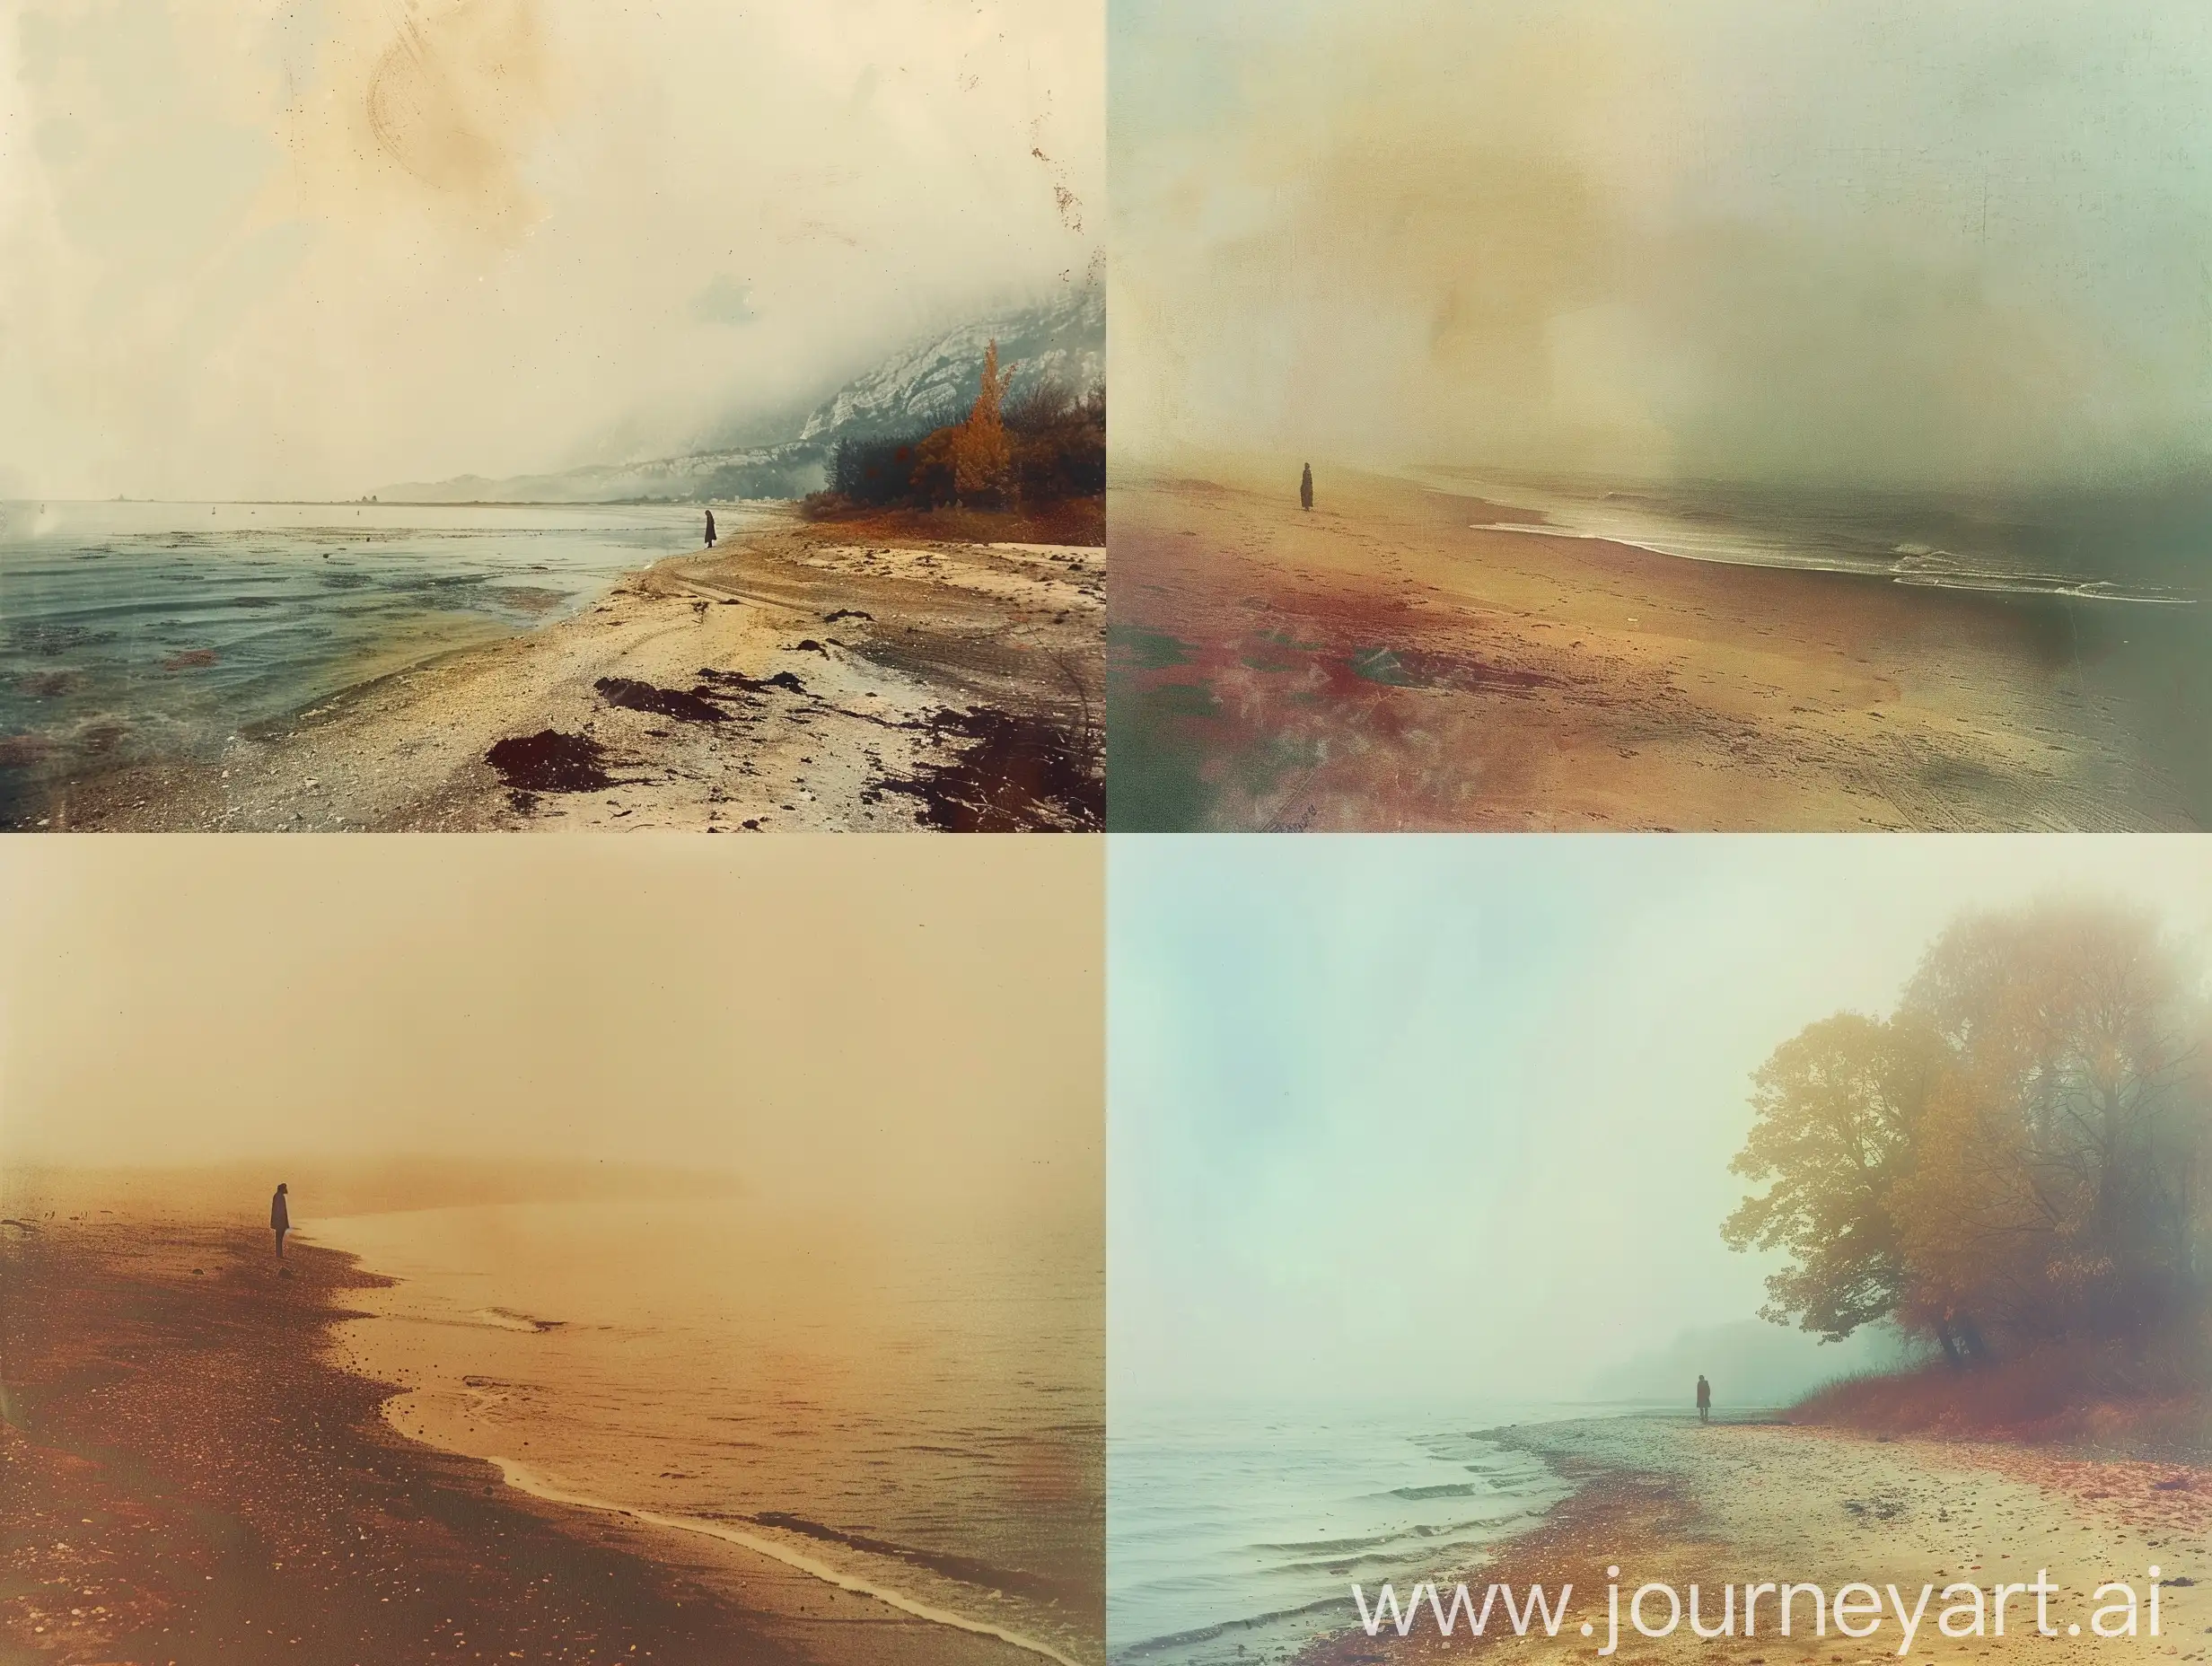 Solitary-French-Poet-Contemplates-on-Misty-Jupiter-Beach